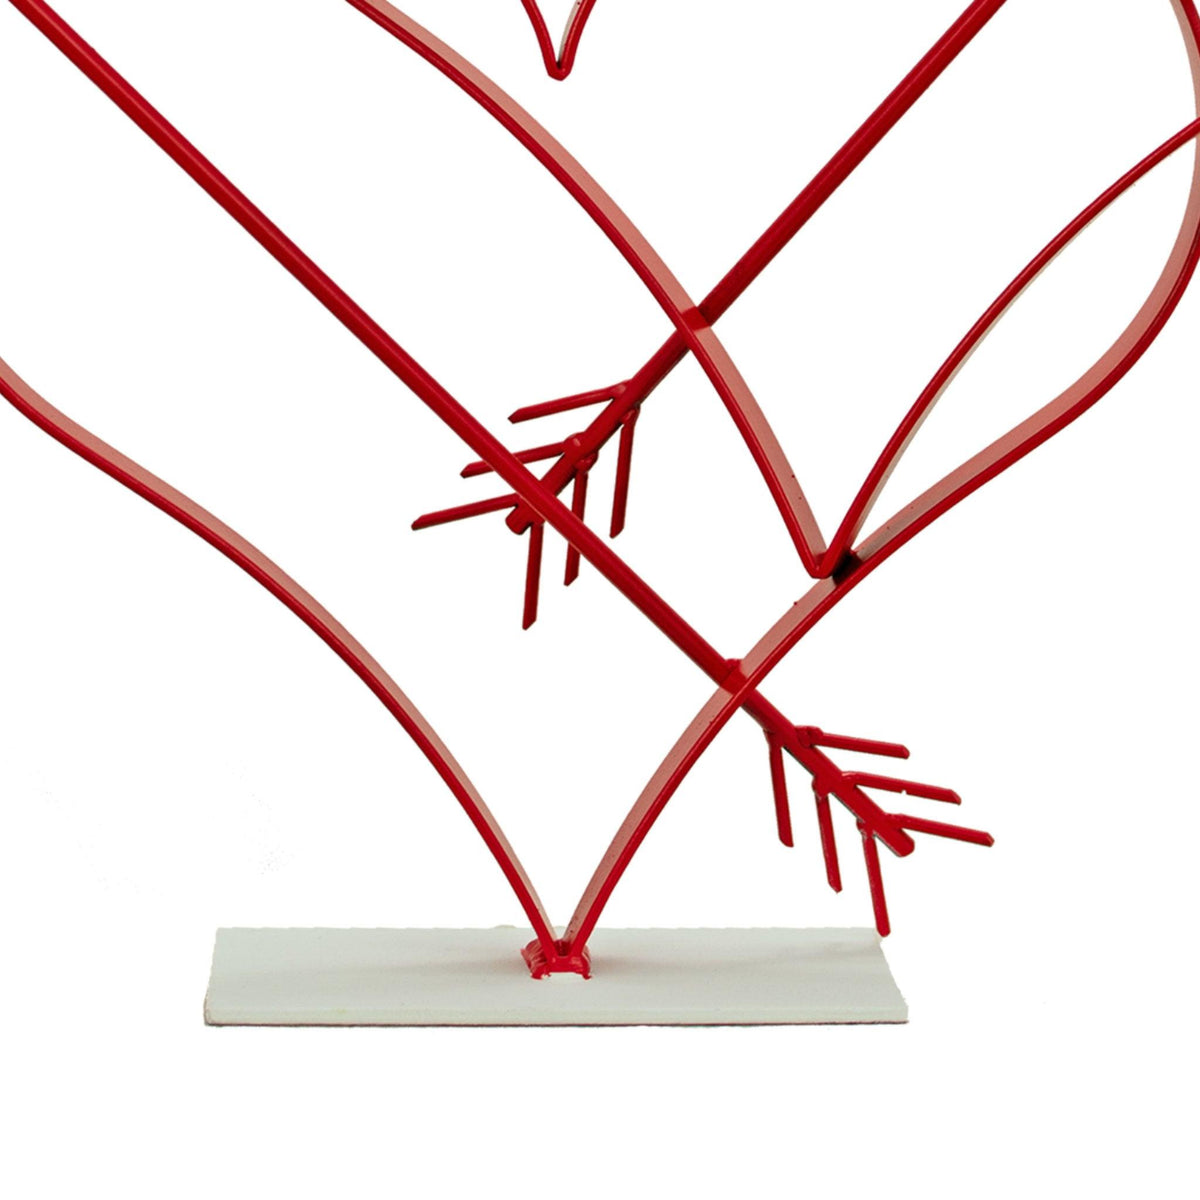 Lee Display's Valentine's Day Double Heart Centerpiece with Cupid's Arrow.  On sale now at leedisplay.com